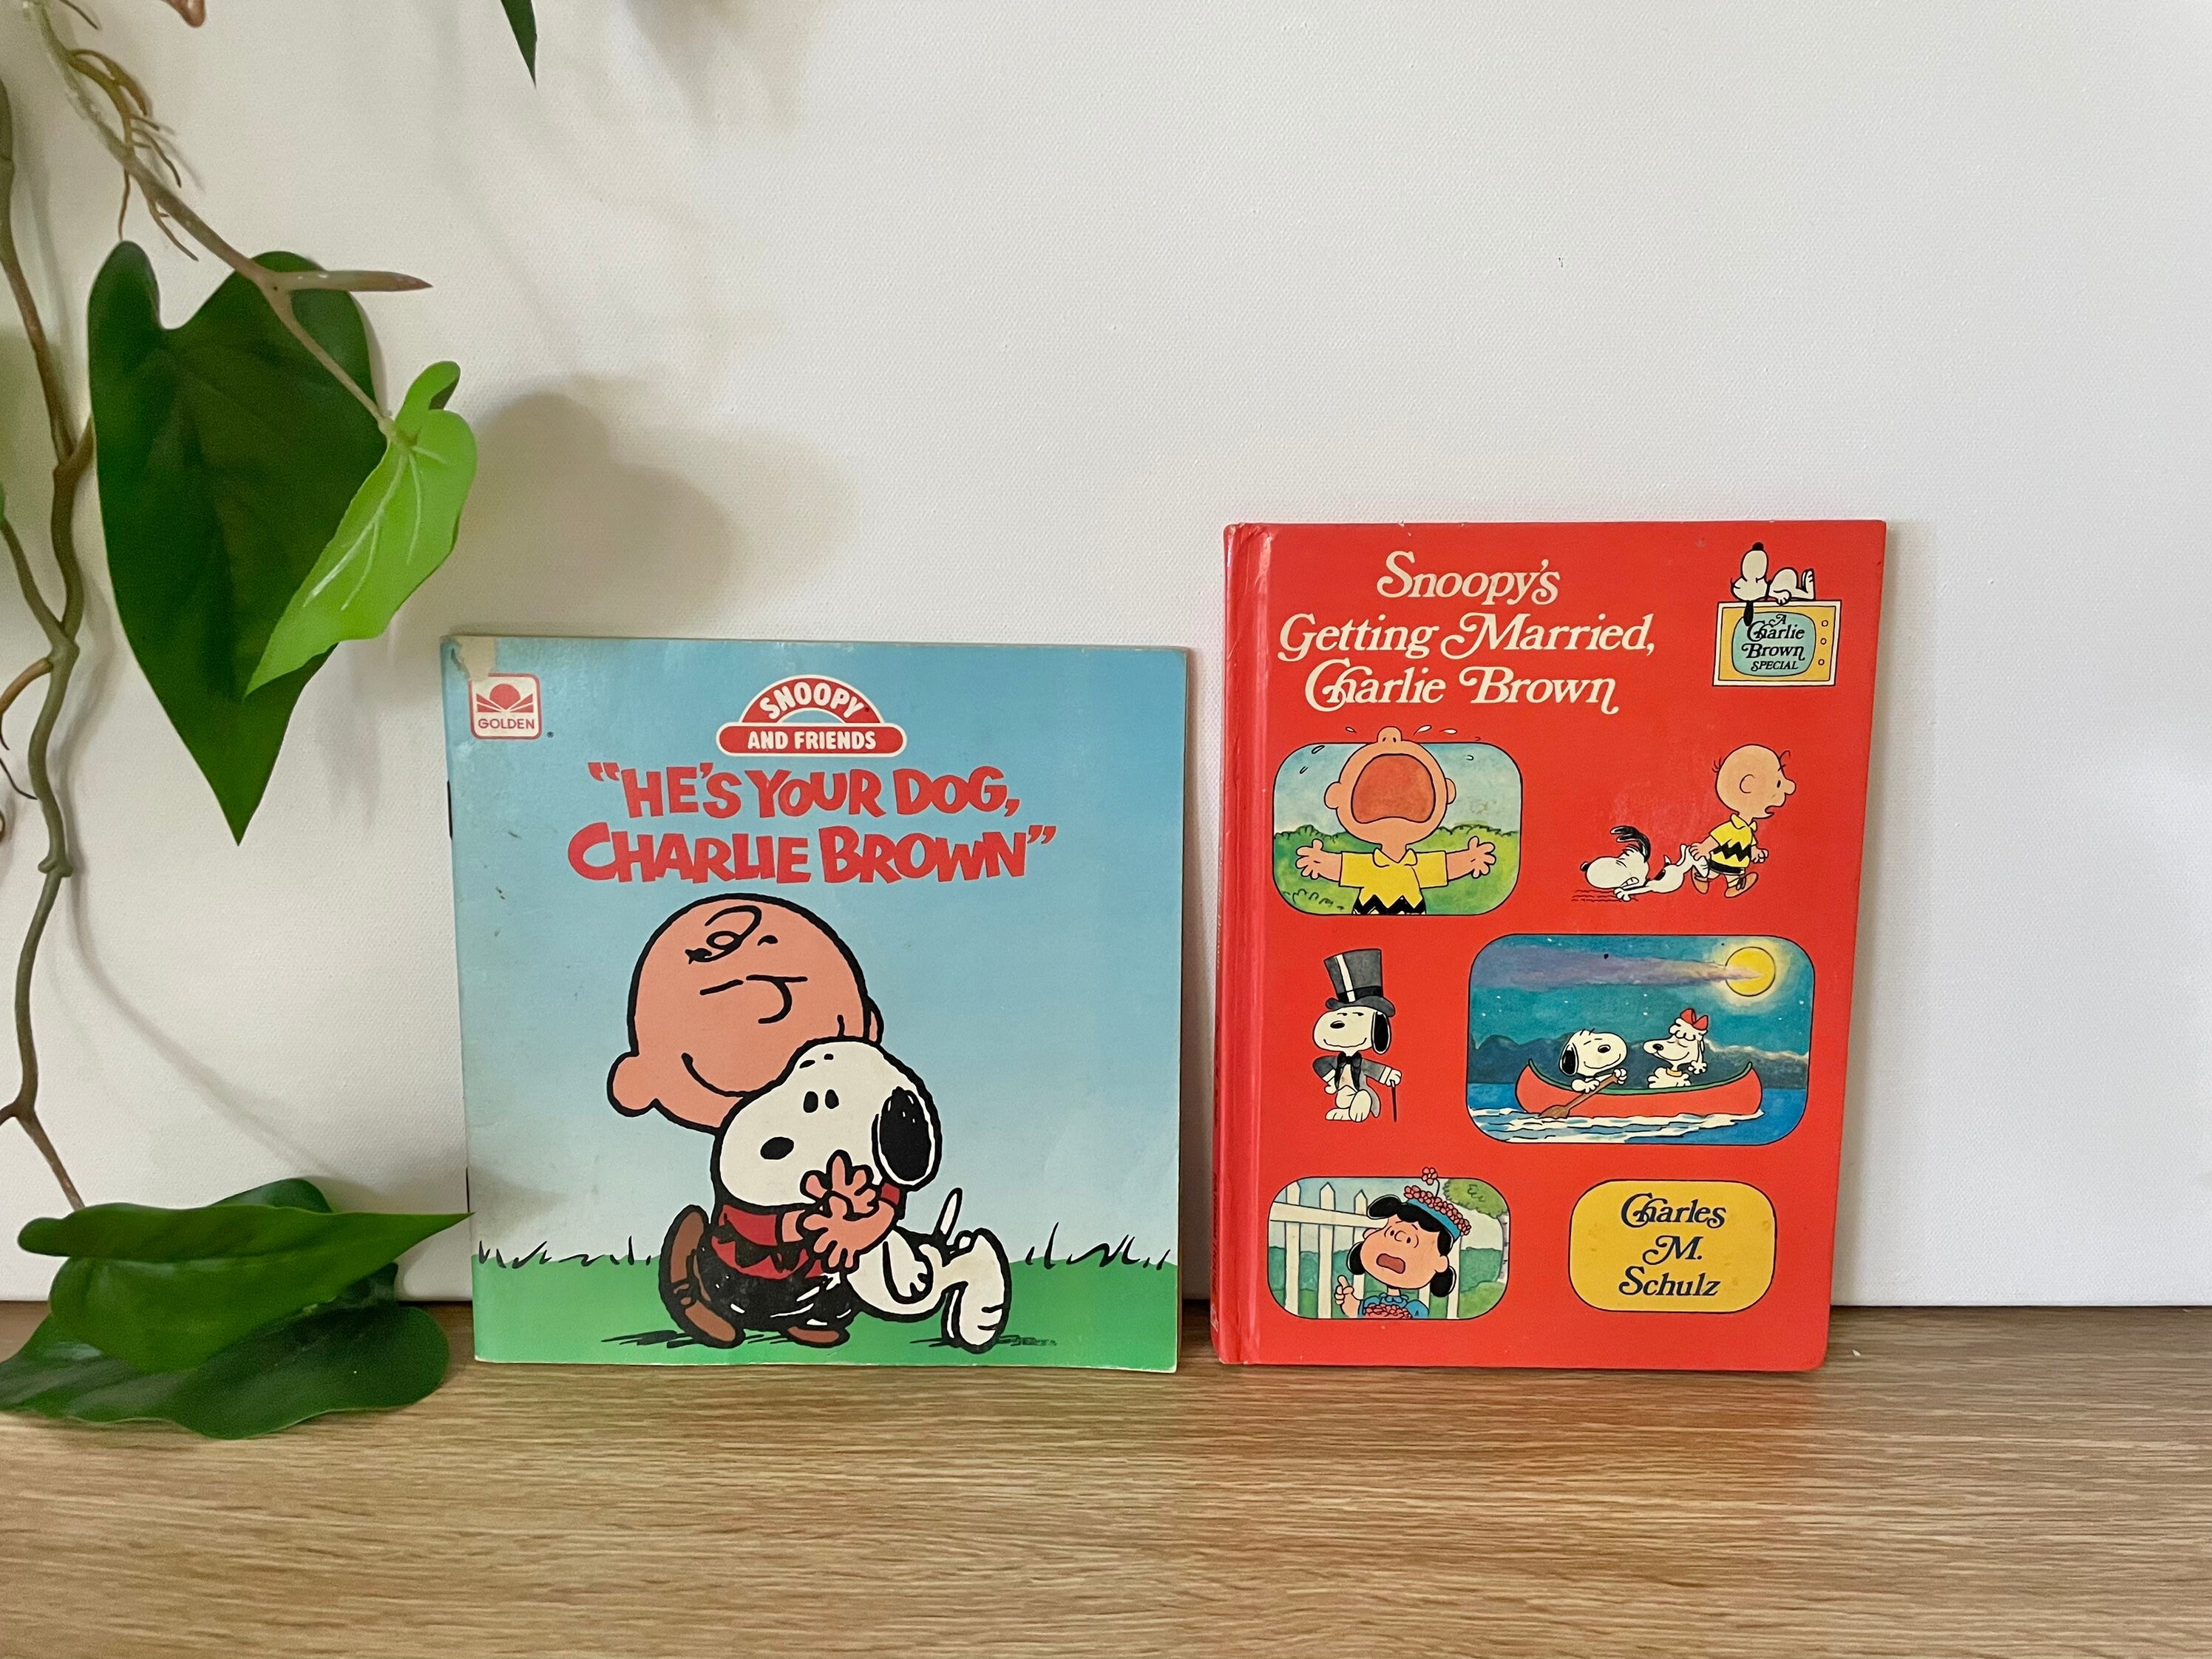 India　Comic　Snoopy　Buy　India　In　Books　Online　Etsy